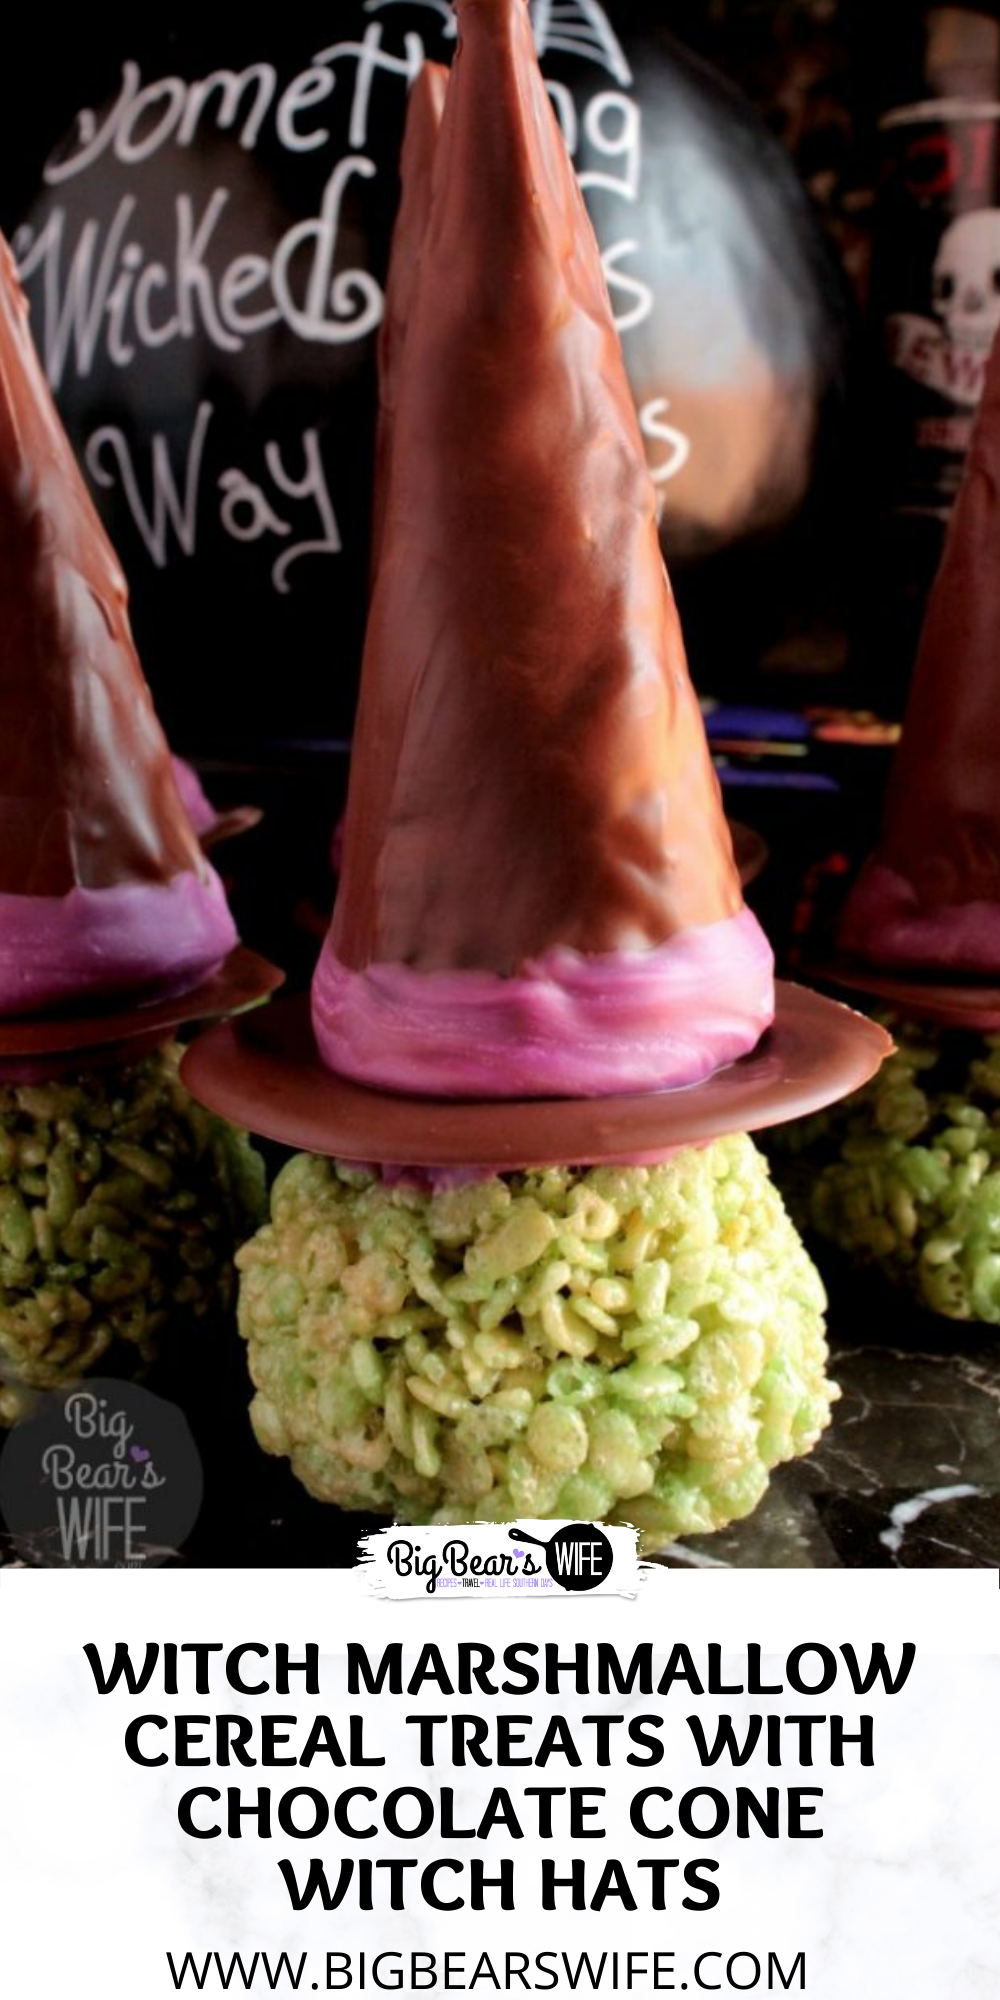 Ready for a spooky treat that's sweet to eat? These Witch Marshmallow Cereal Treats with Chocolate Cone Witch Hats have Halloween written all over them! Enjoy them at home or give them out as treats! via @bigbearswife